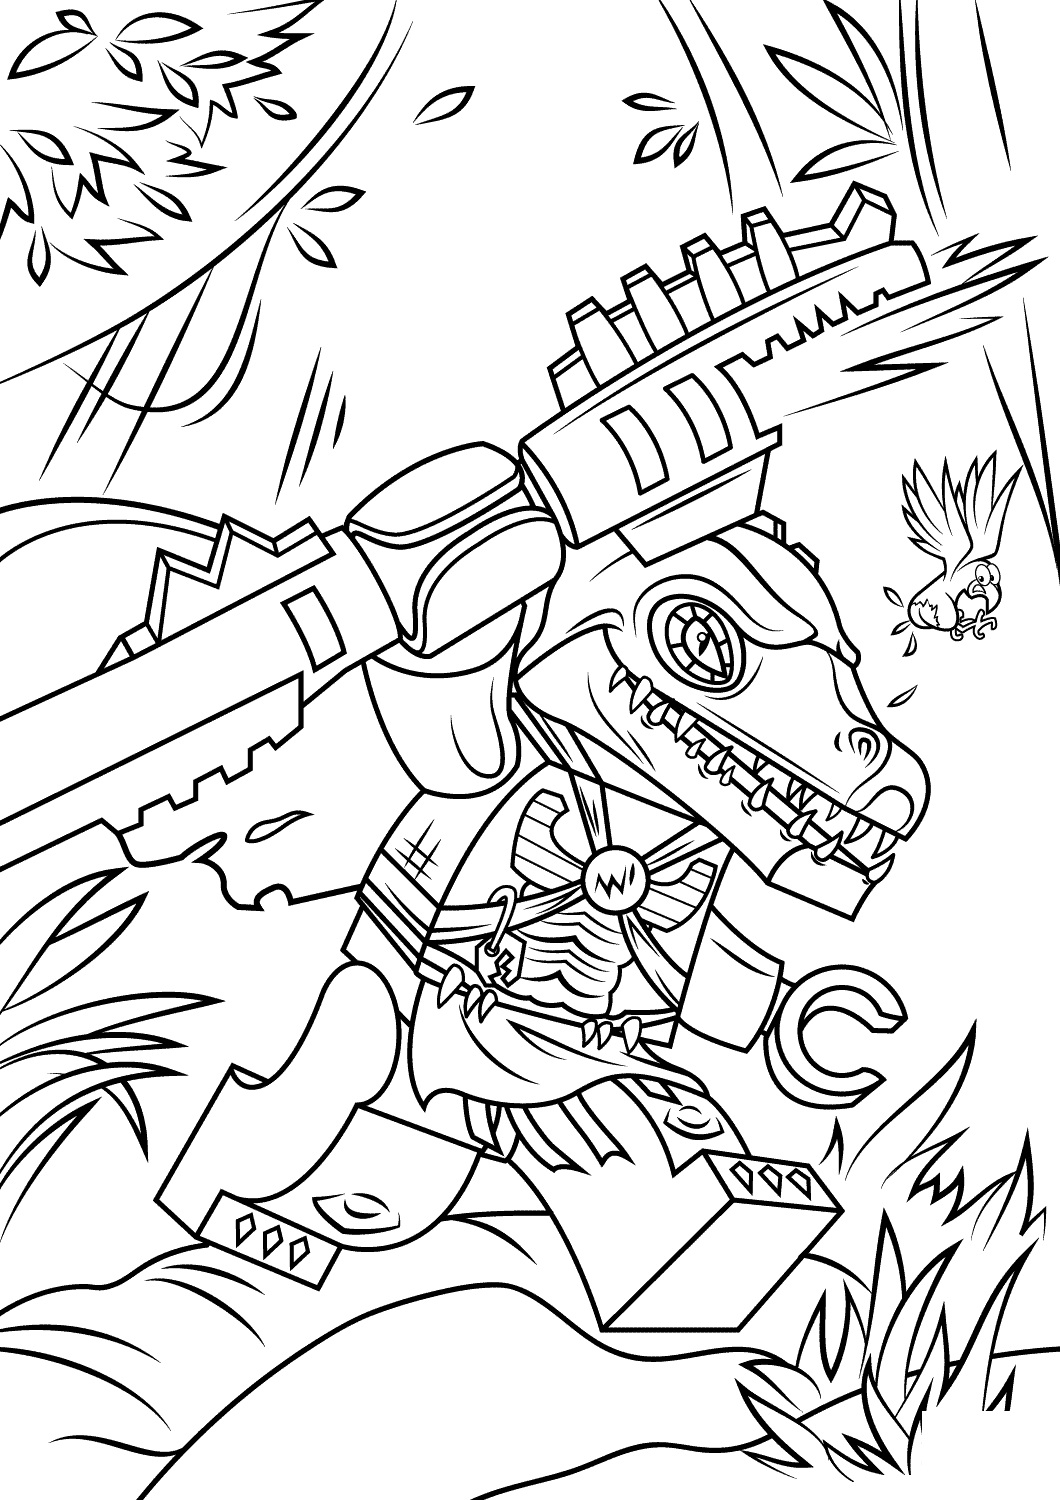 Cragger from Legends of Chima Coloring Pages